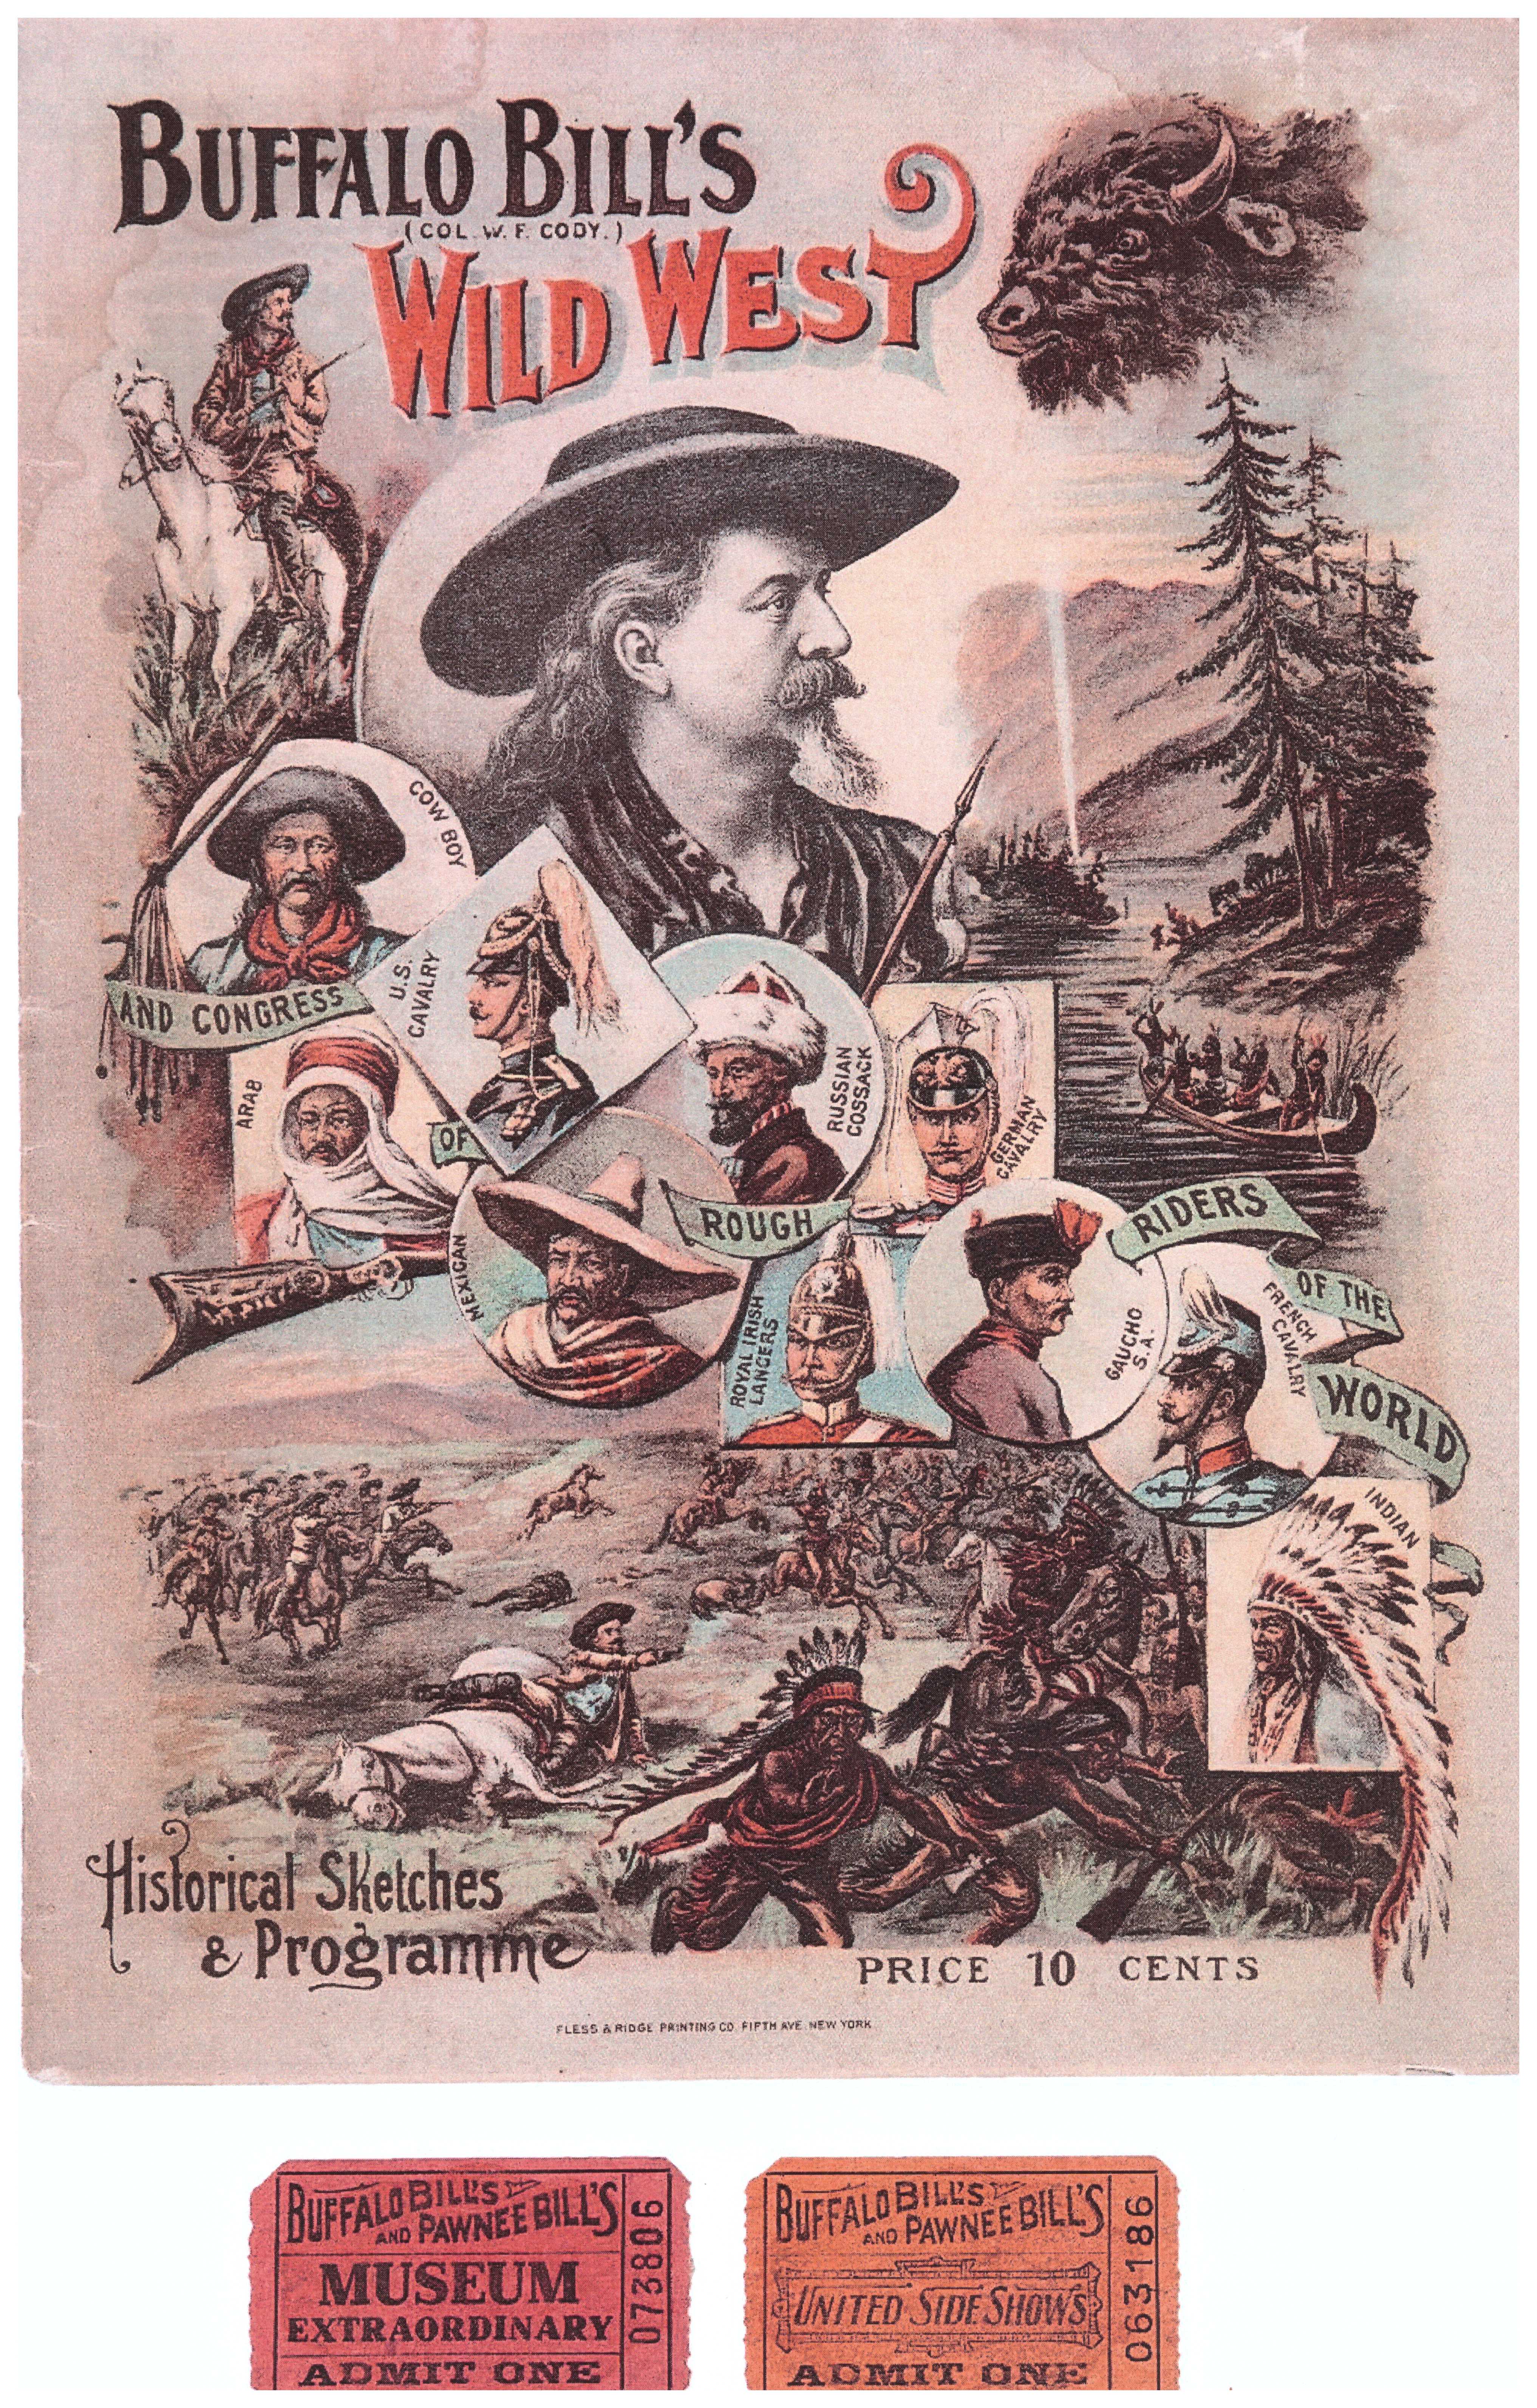 Wild West Show poster and tickets